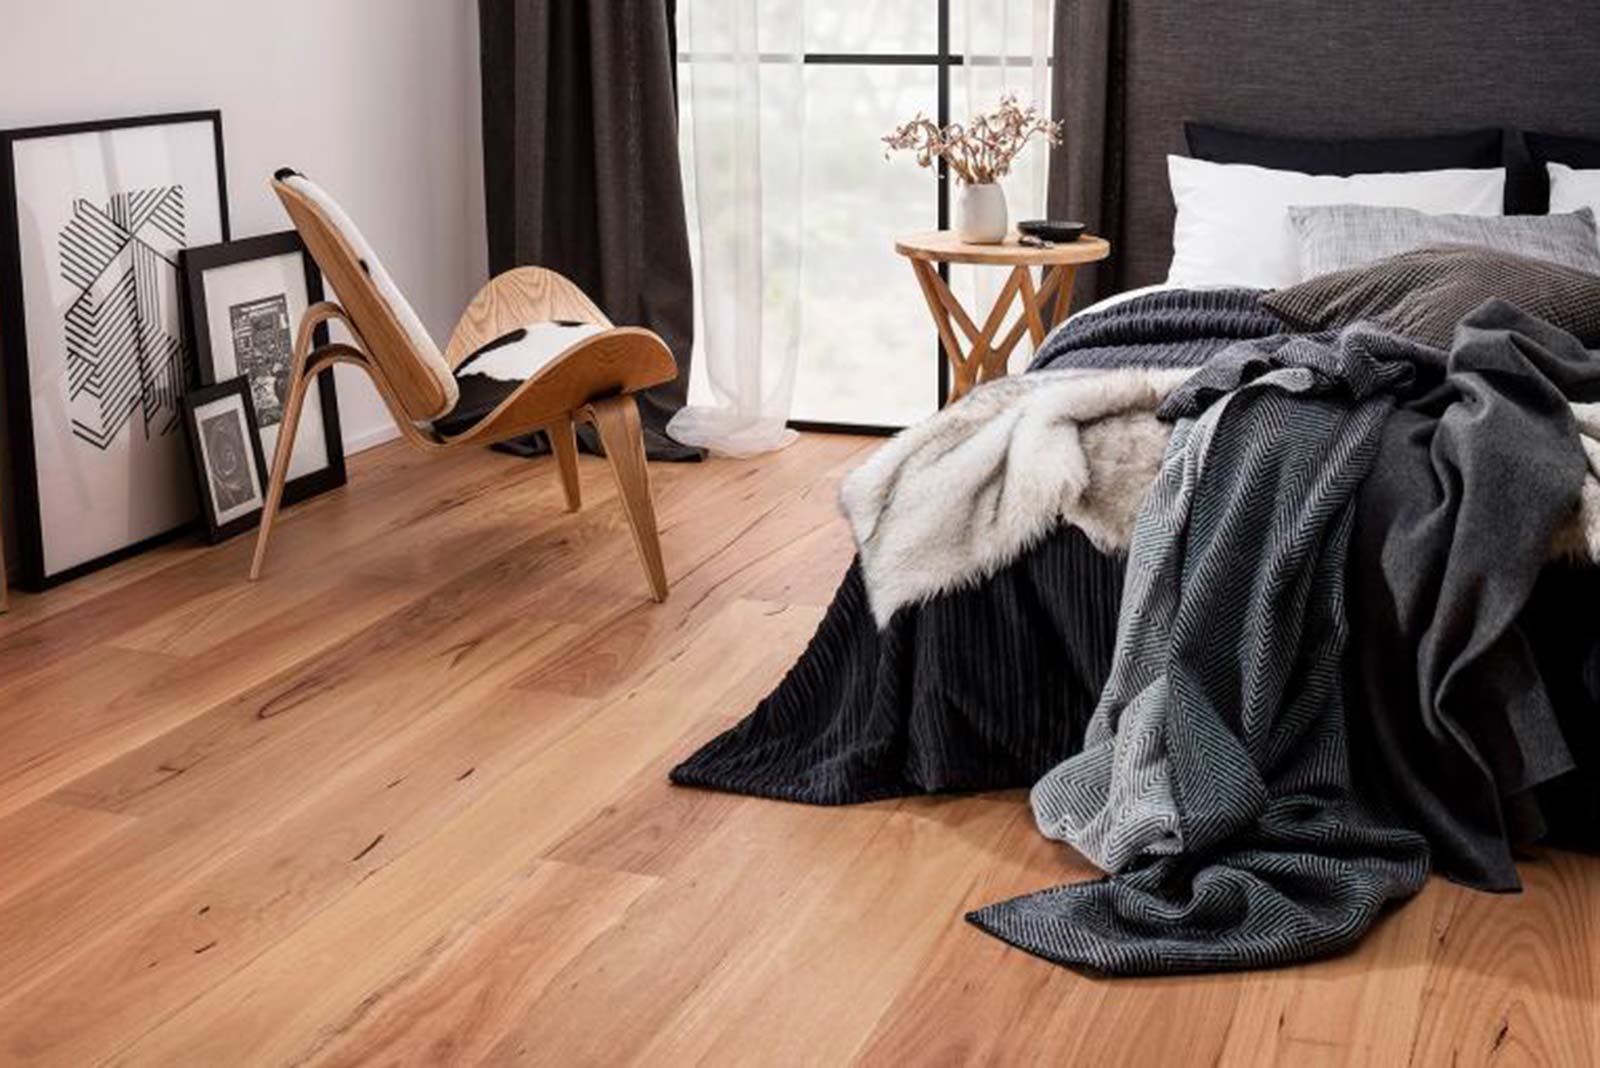 Adelaide Flooring Products: Australian Timber